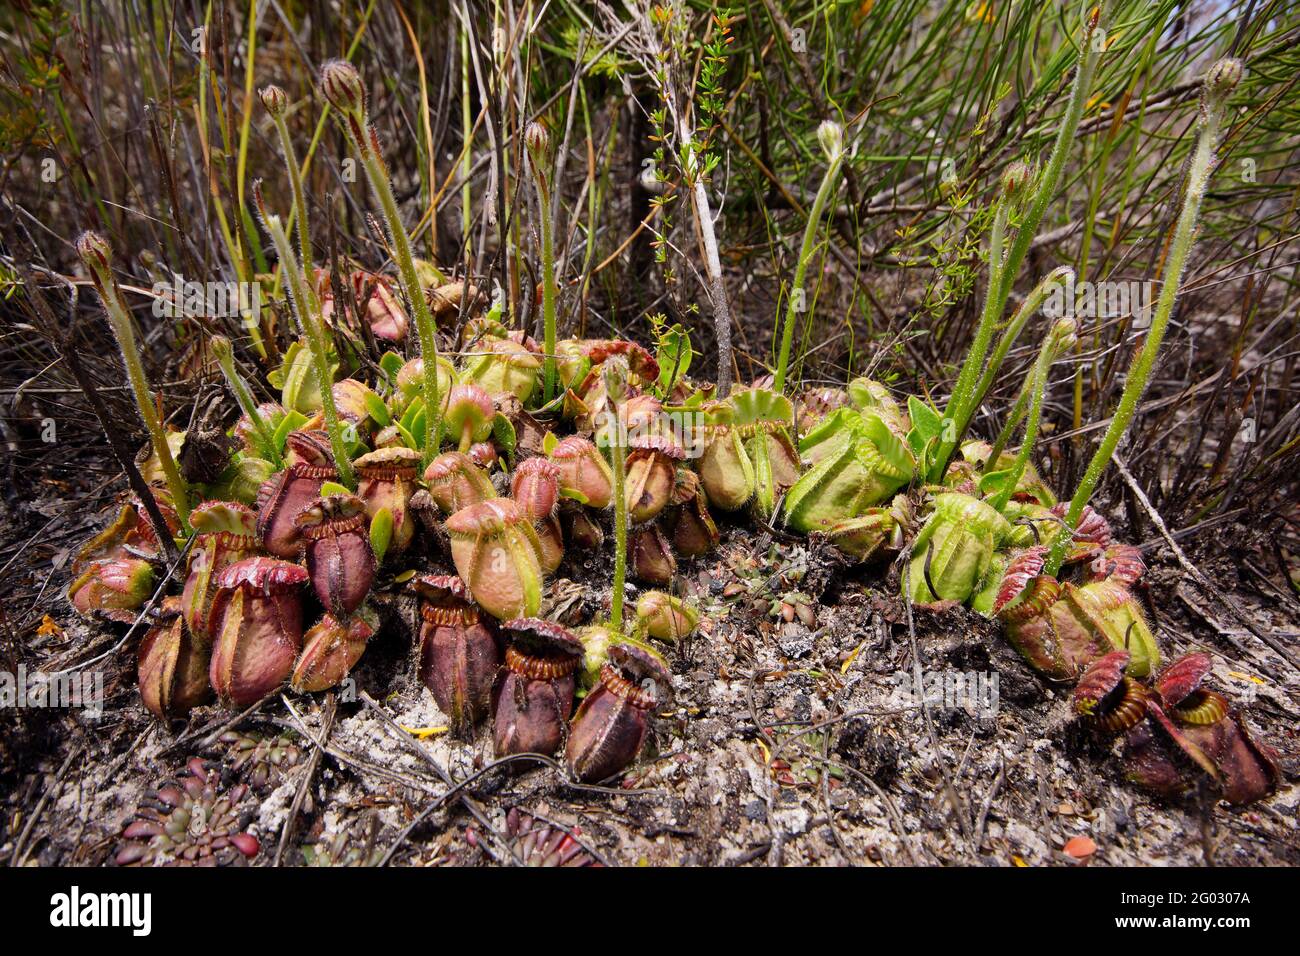 Large group of Cephalotus follicularis, the Western Australian pitcher plant, in natural habitat with flower stalks Stock Photo